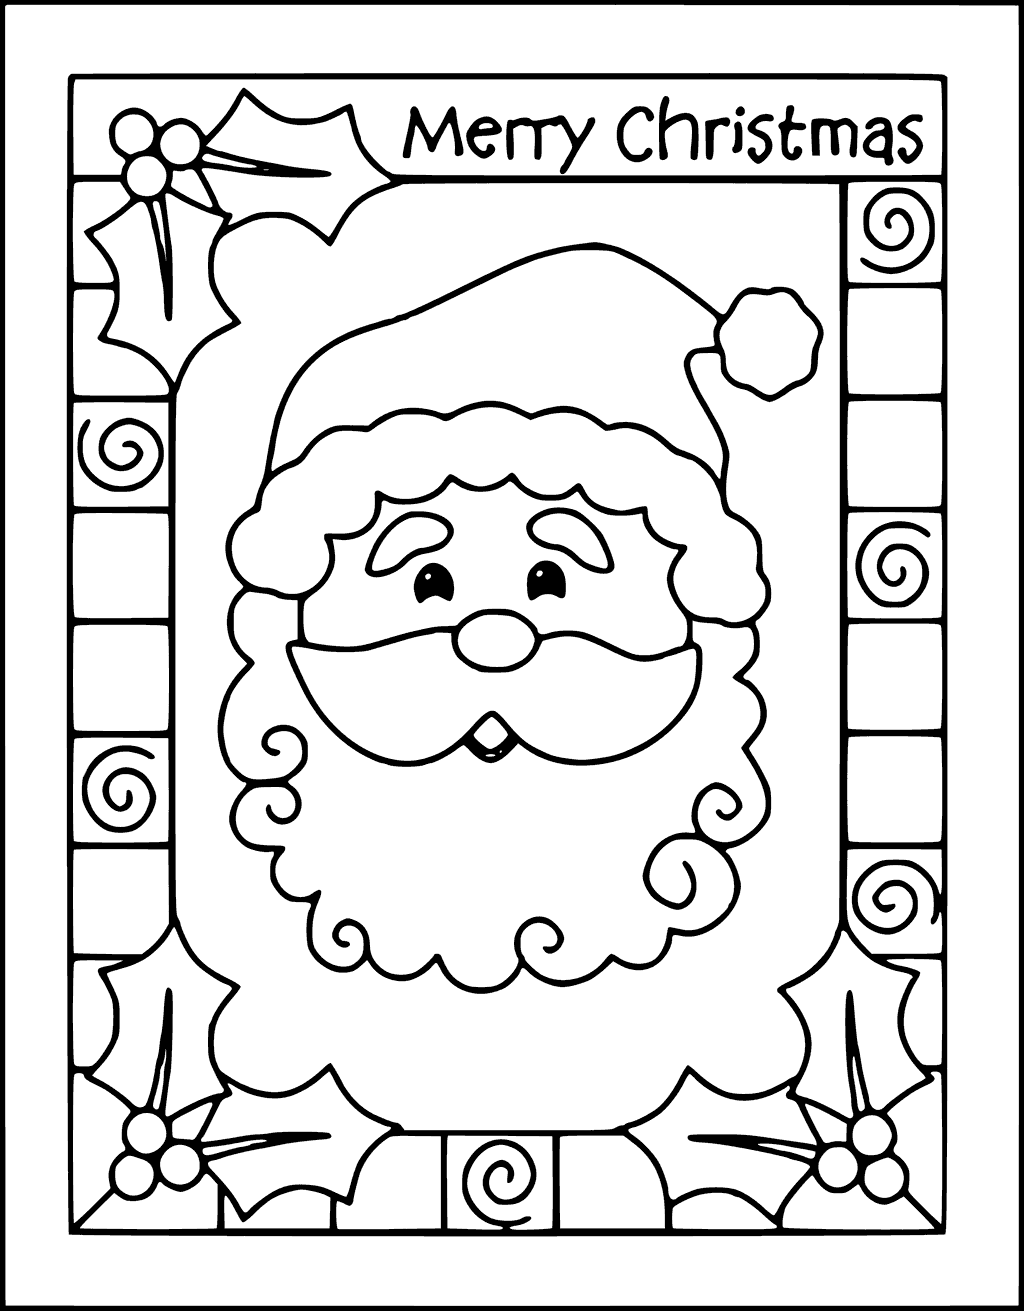 Christmas Card Coloring Pages At GetColorings Free Printable Colorings Pages To Print And